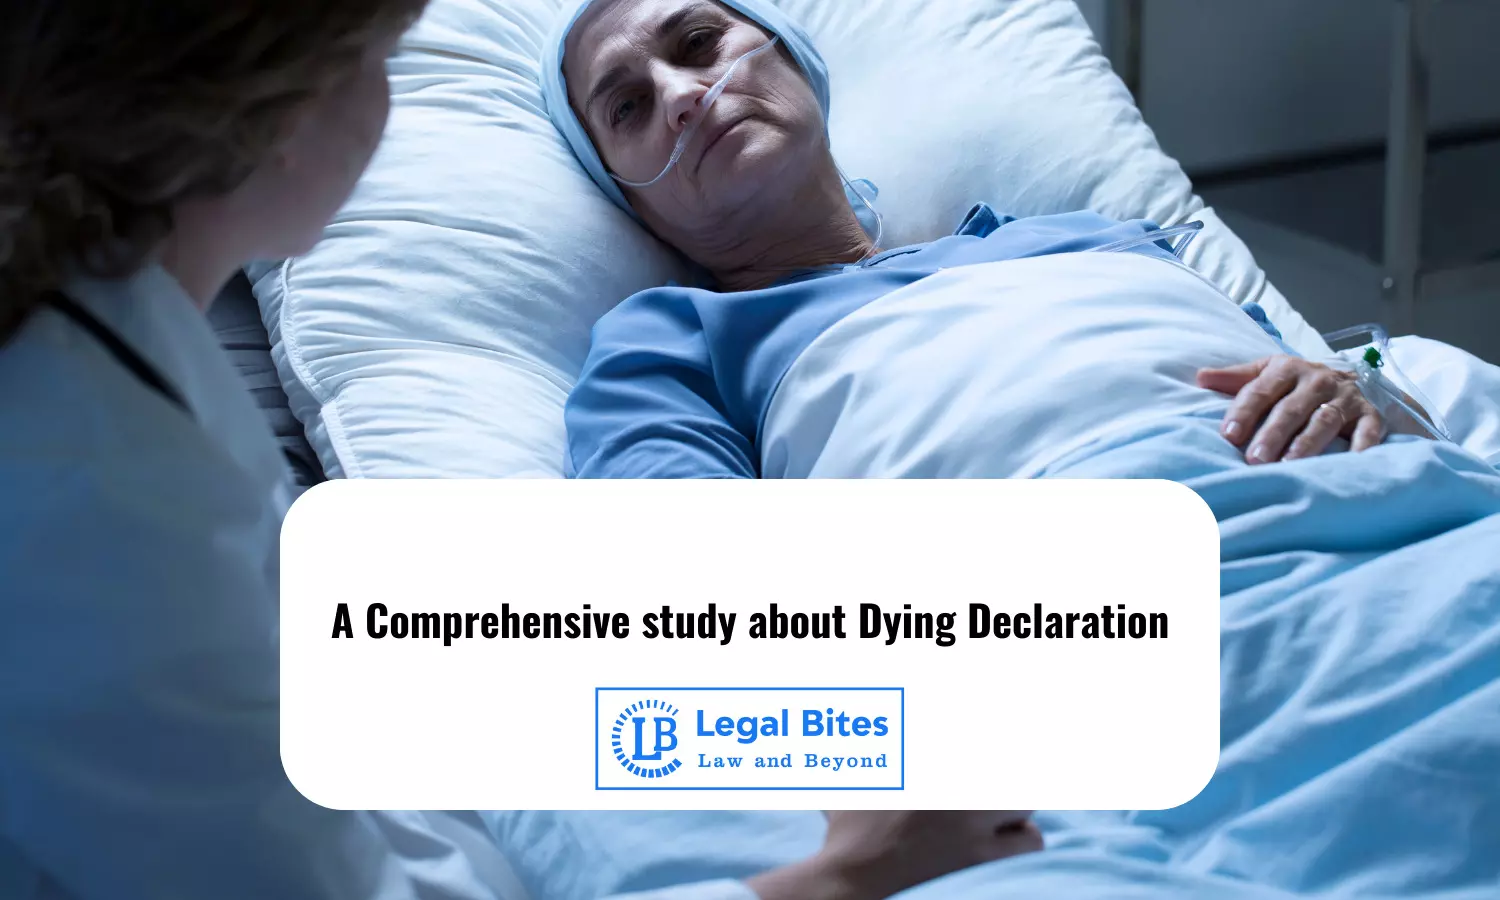 A Comprehensive study about Dying Declaration